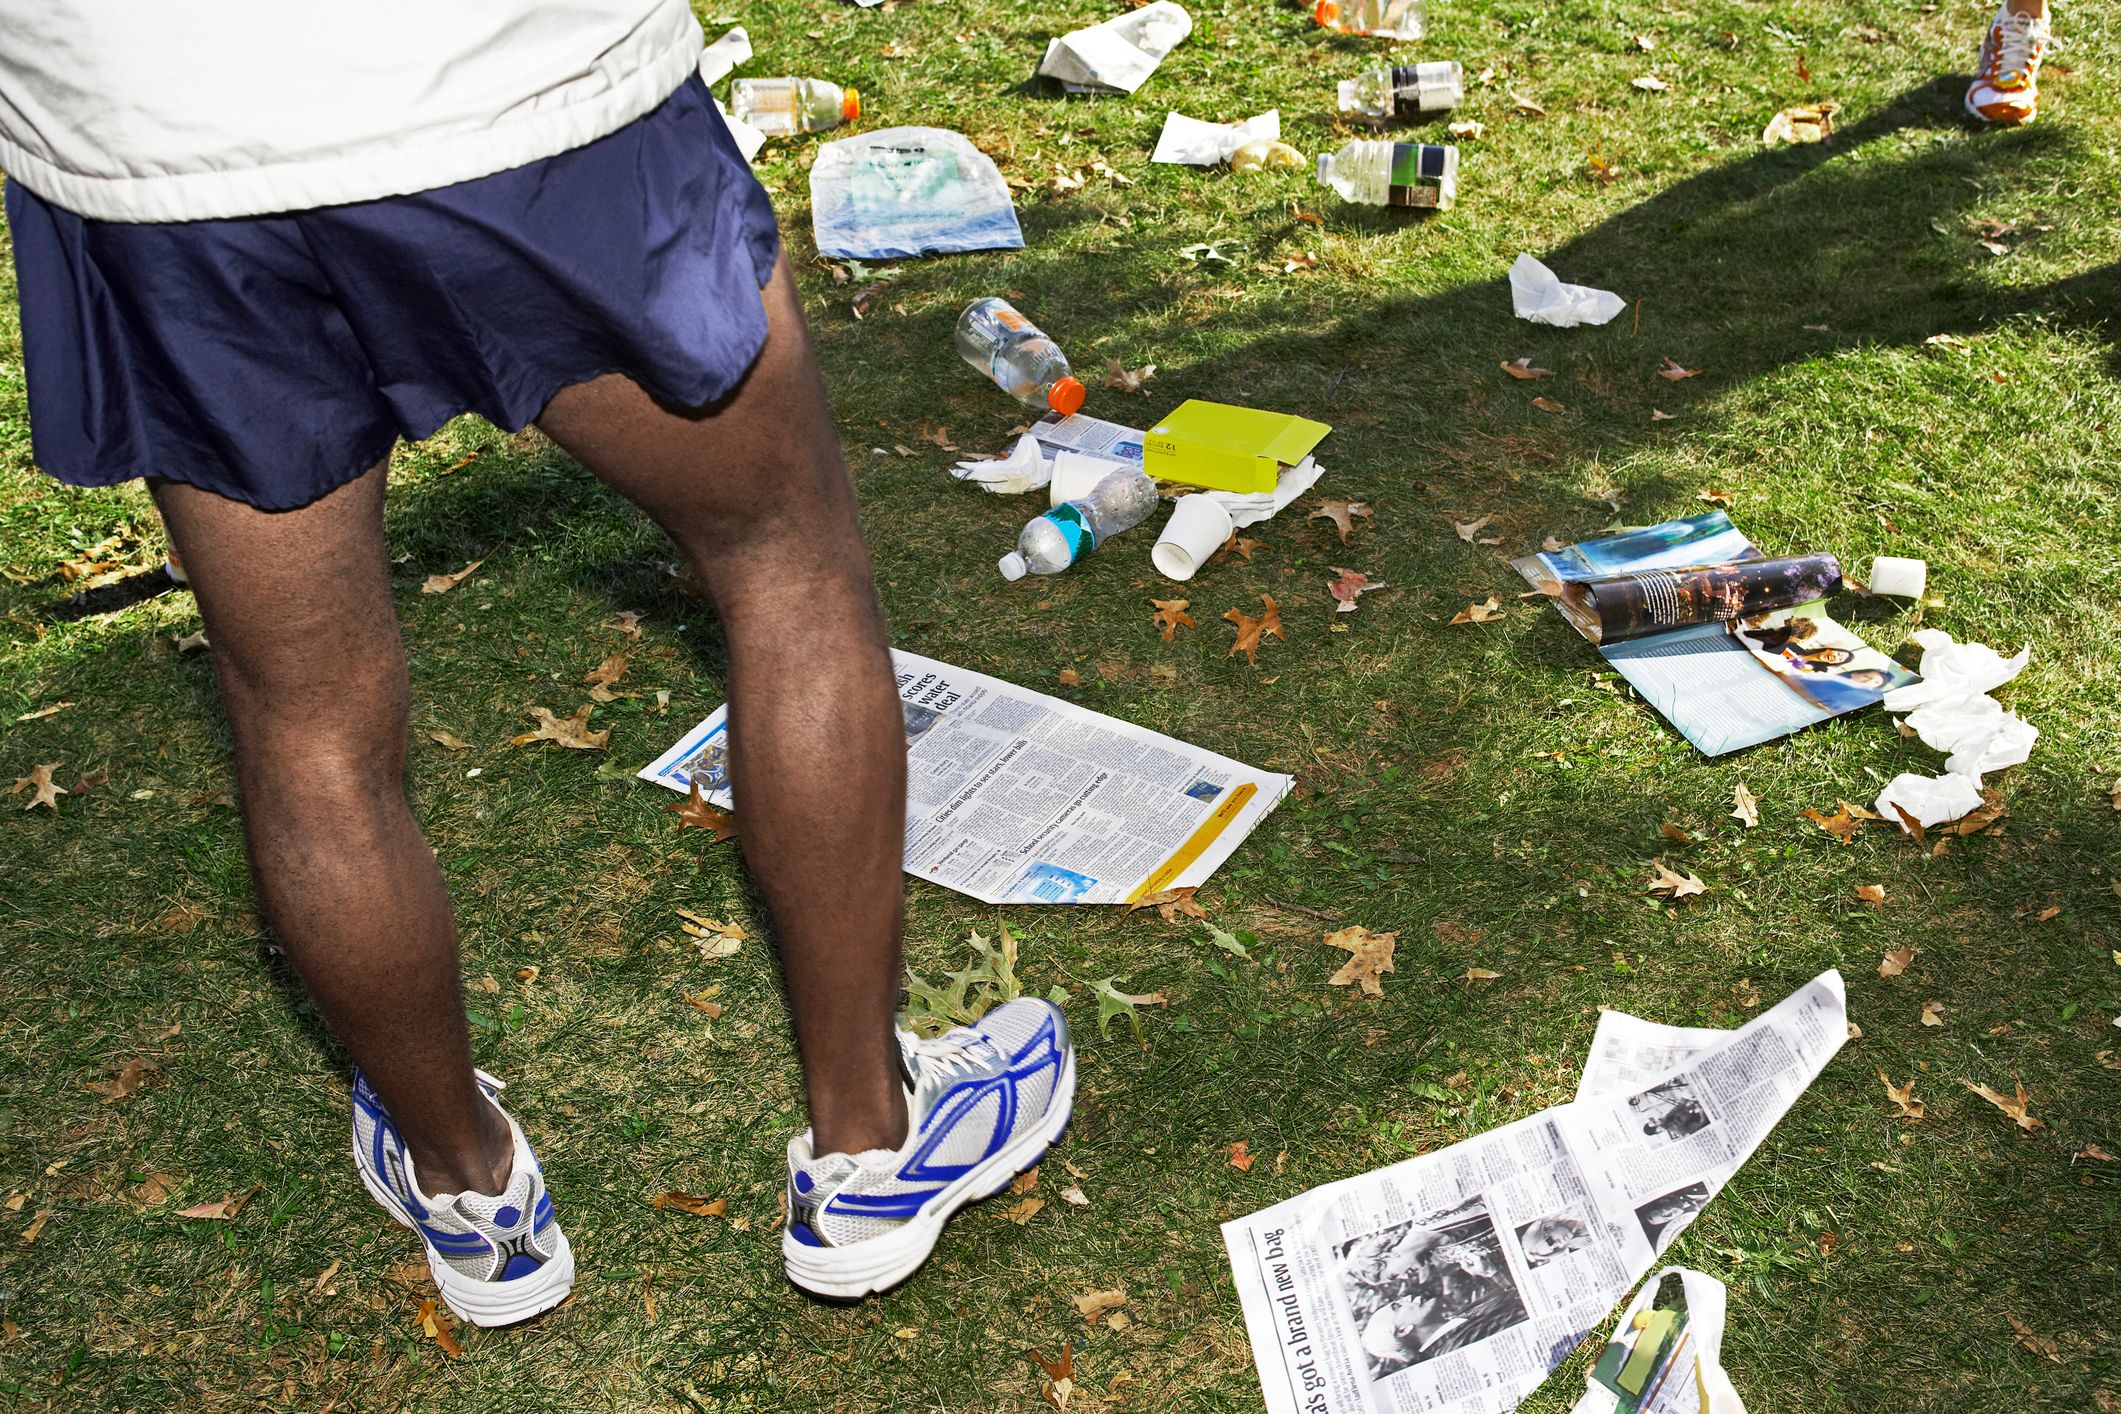 Getting fit and helping the environment: Everything you need to know about Plogging